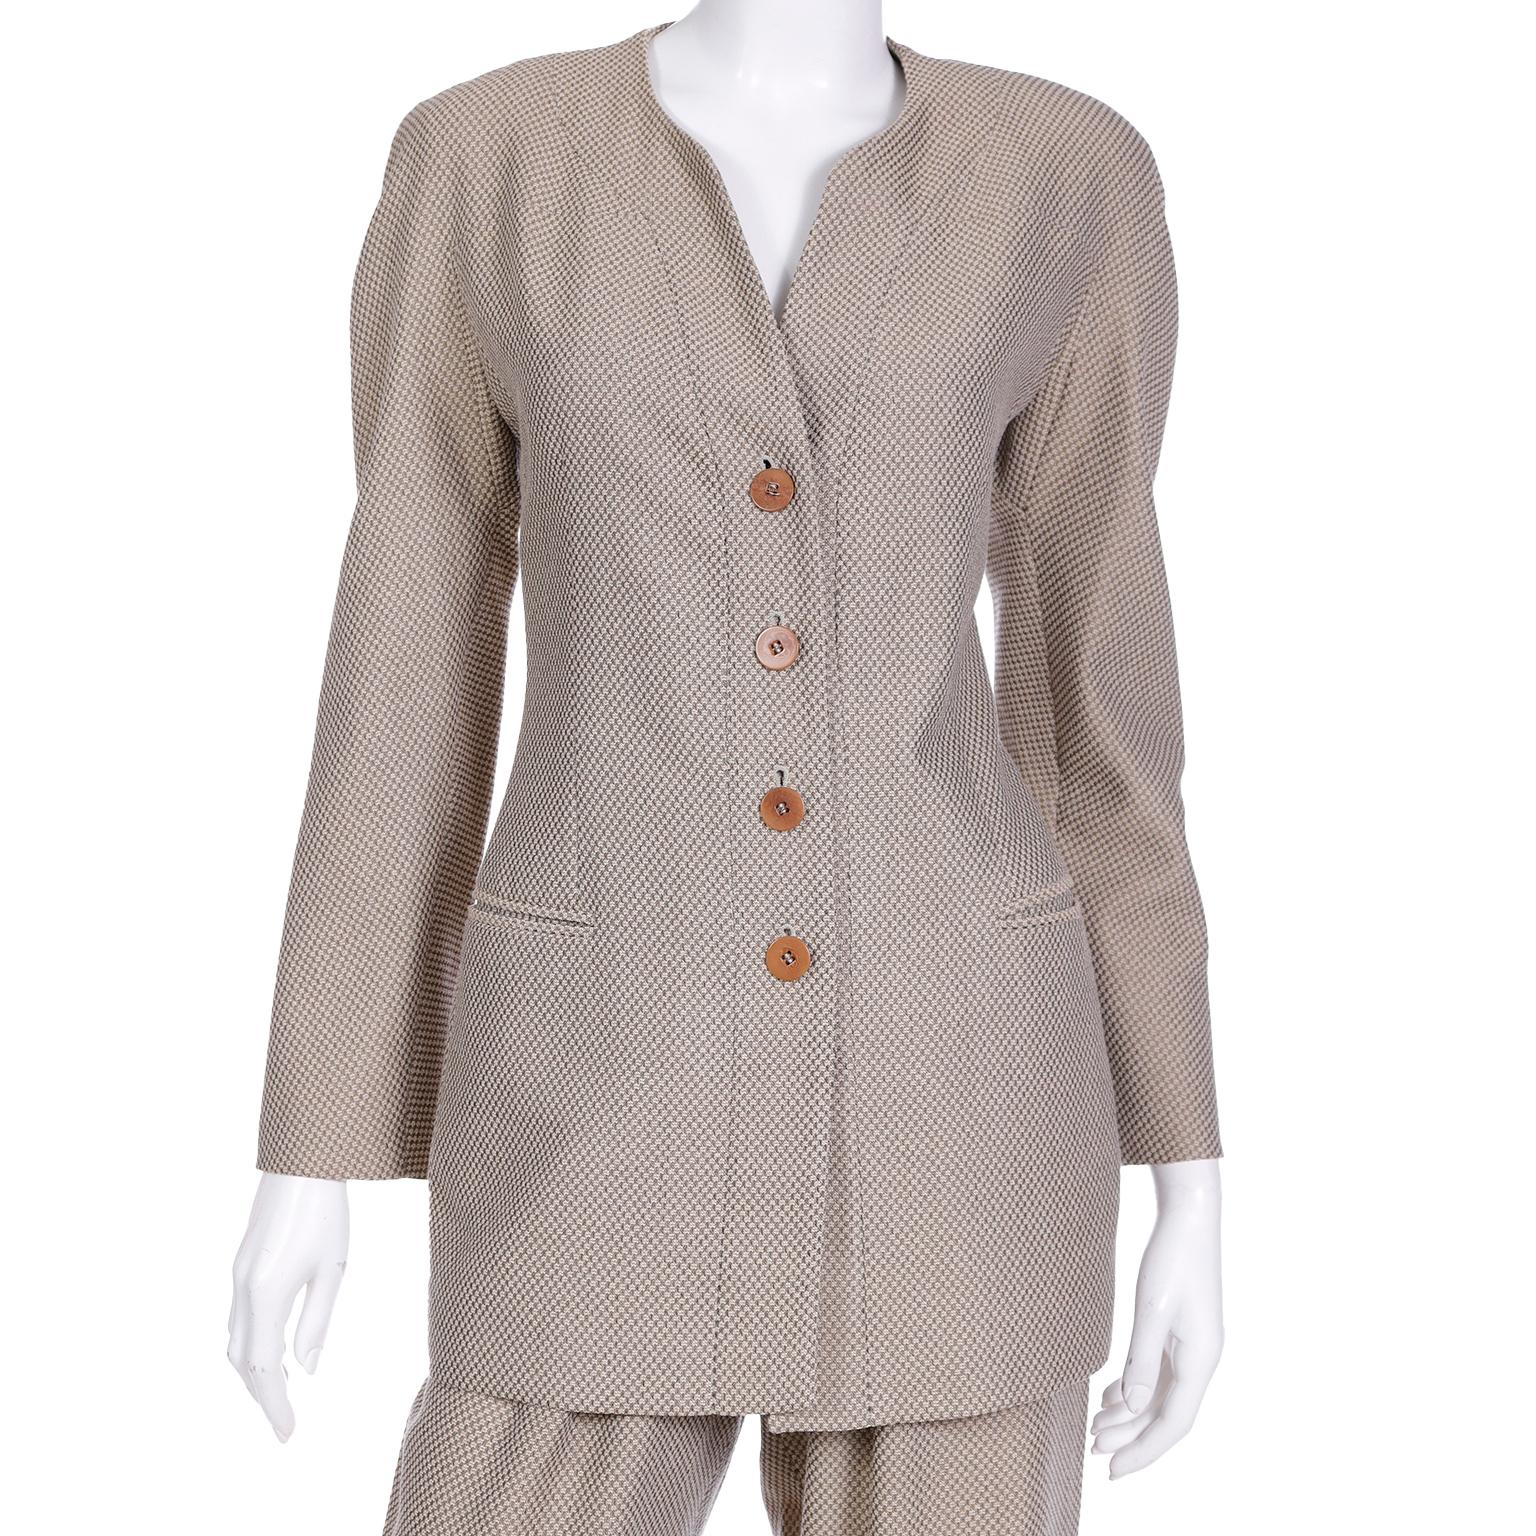 Giorgio Armani Tan Check Wool Vintage 2pc Jacket and Trousers Suit 2